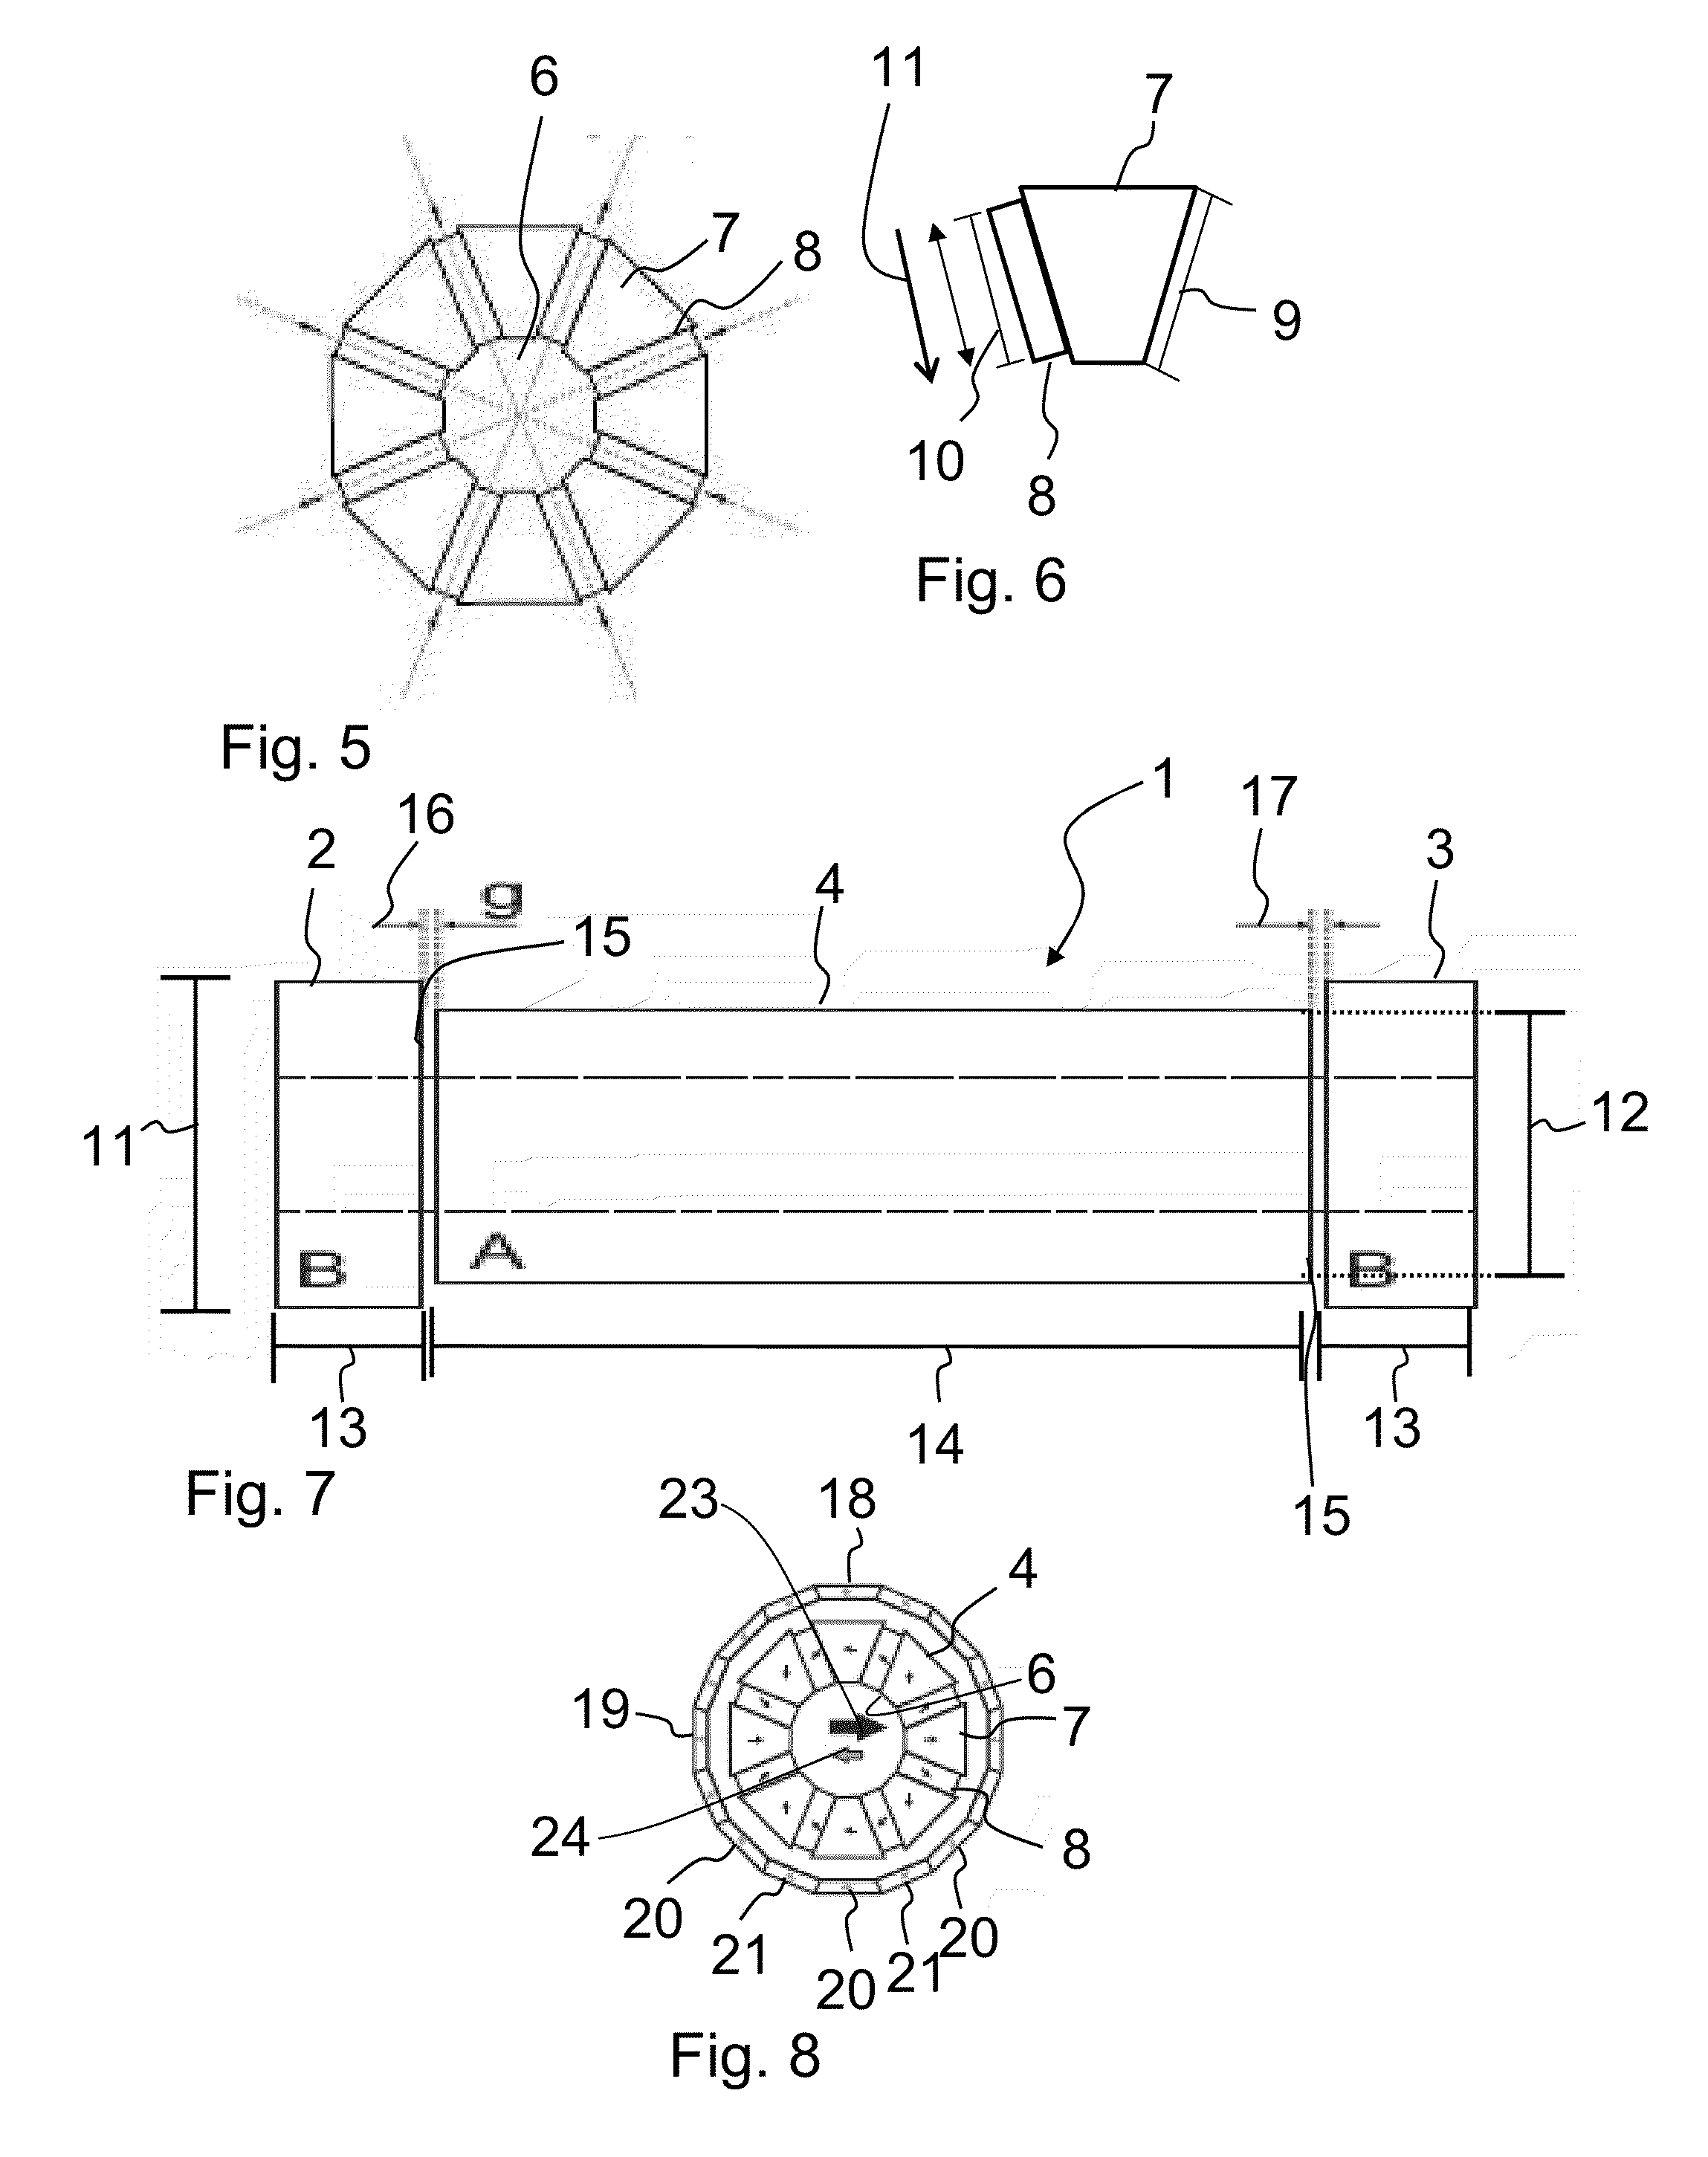 Magnet arrangement and method for providing a magnetic field in a sensitive volume